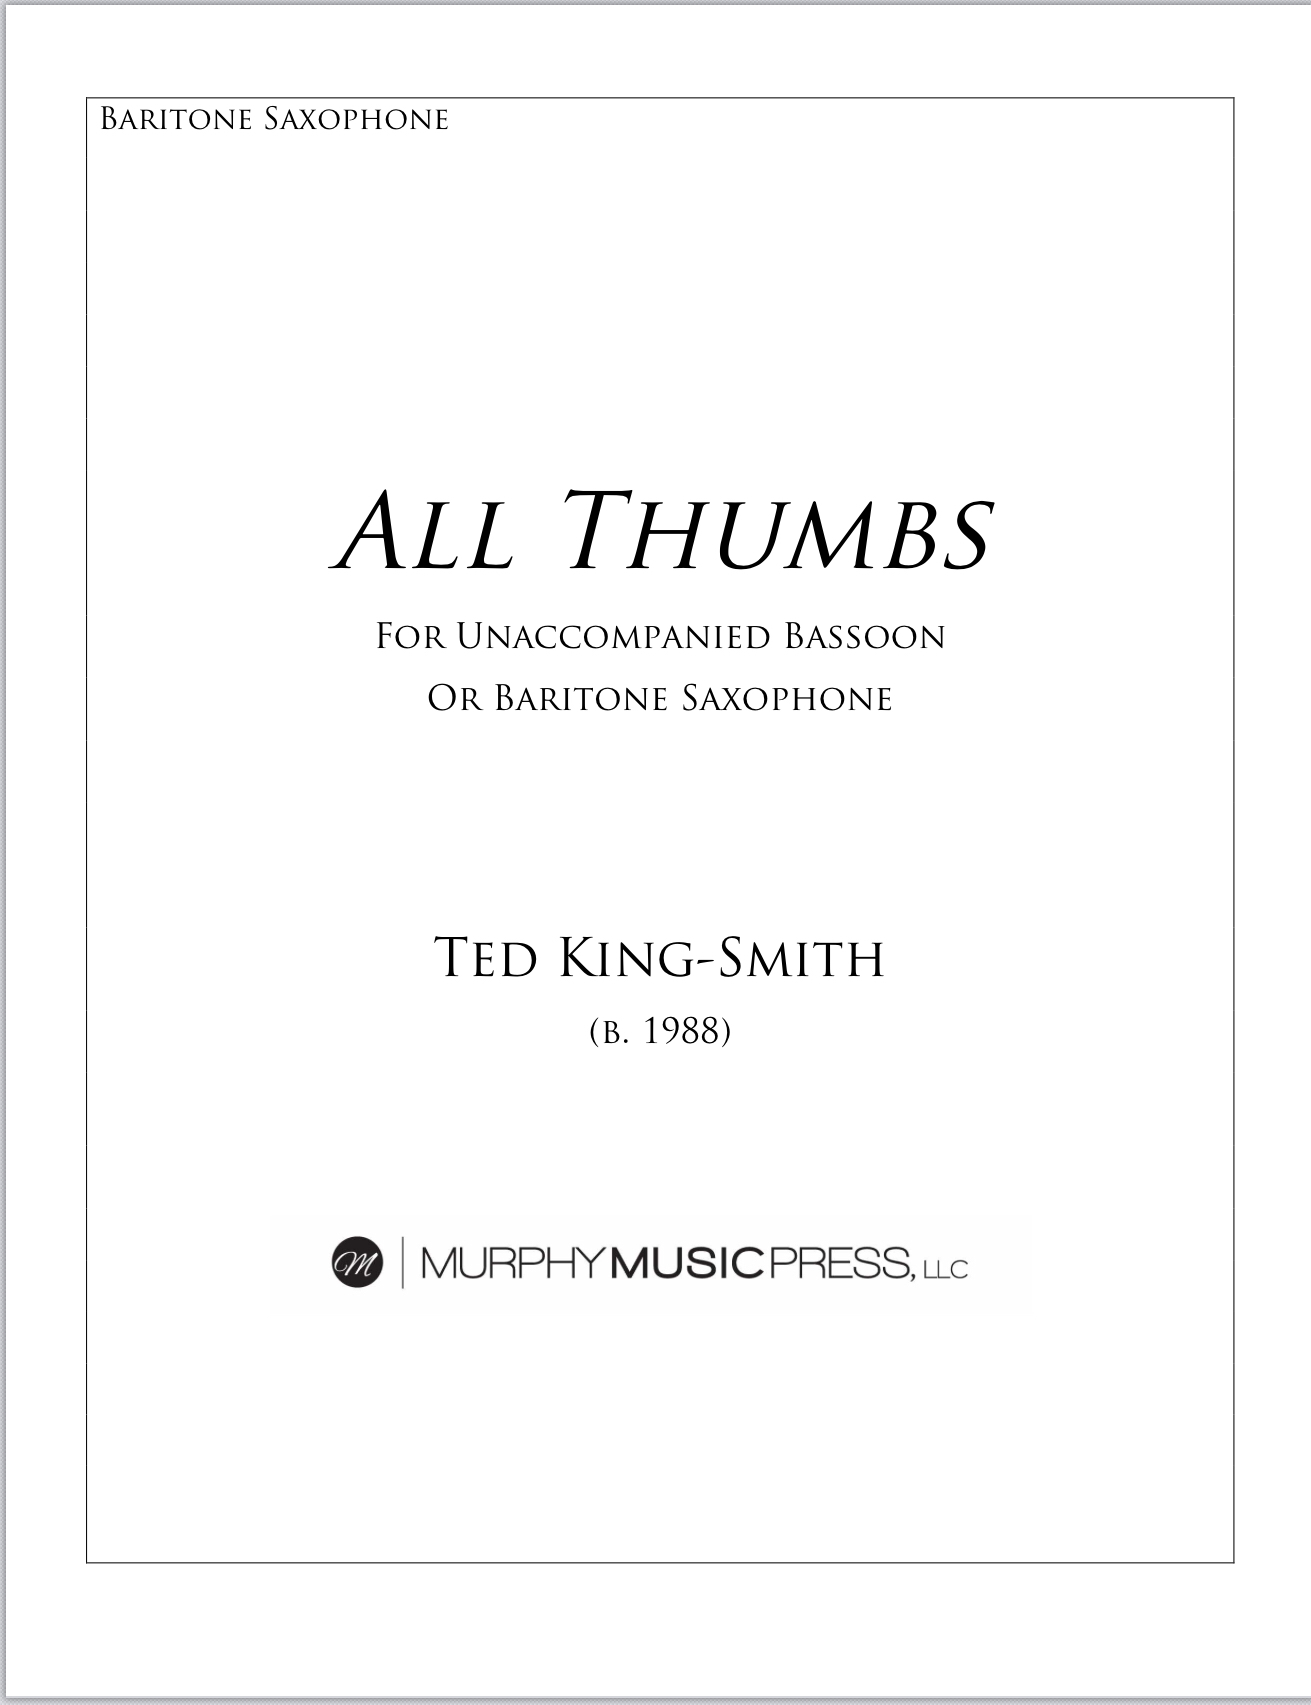 All Thumbs by Ted King Smith